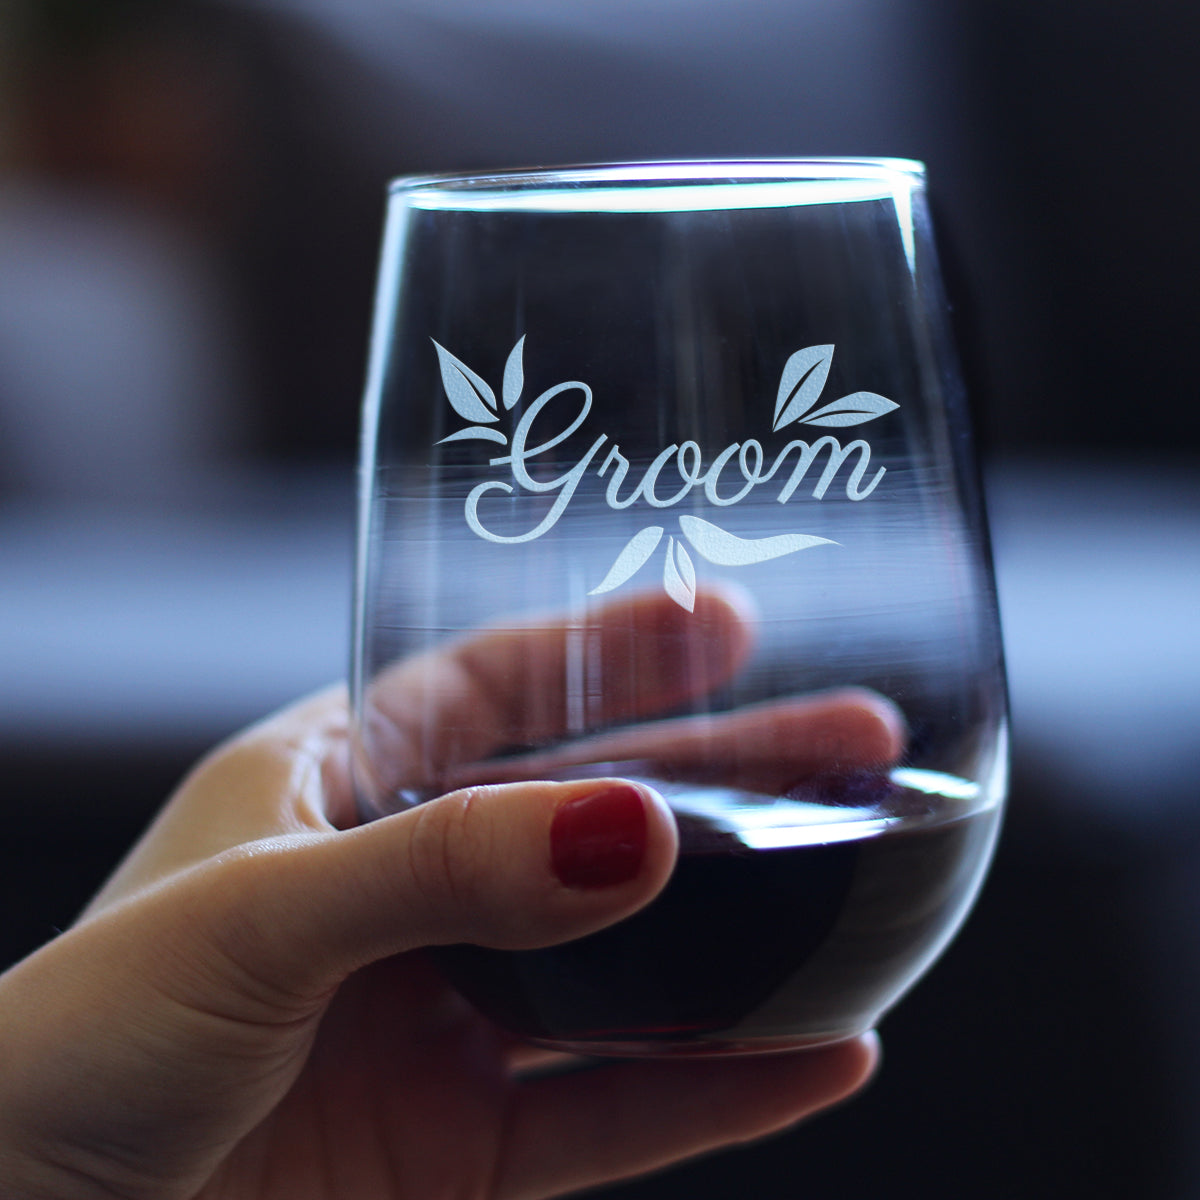 Groom Stemless Wine Glass - Unique Wedding Gift for Groom - Engraved Wedding Cup Gift